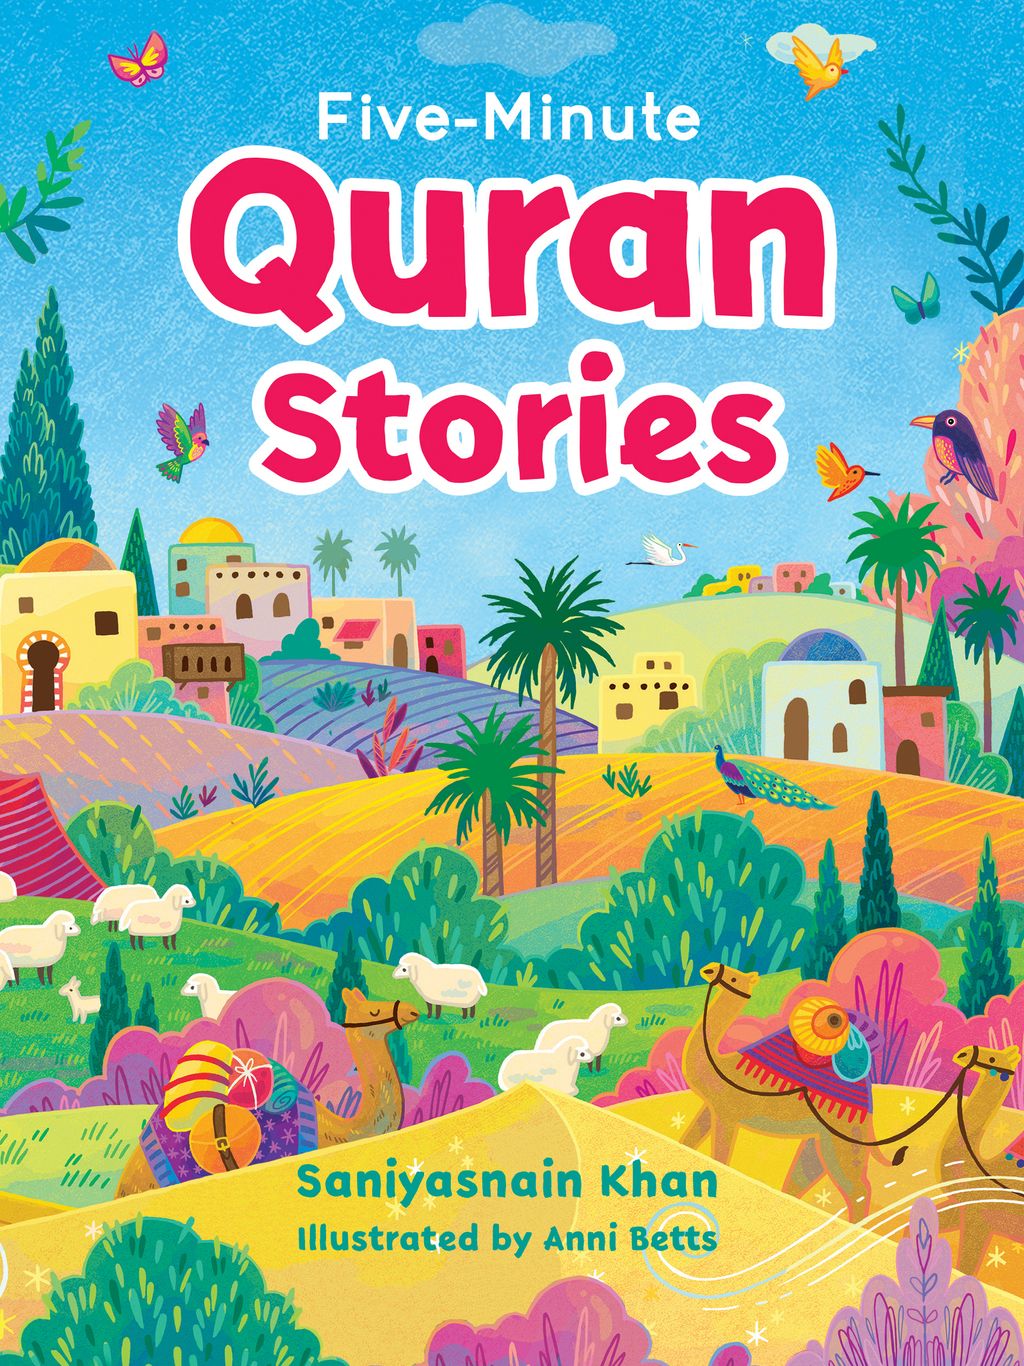 Five Minute Quran Stories Cover for website.jpg